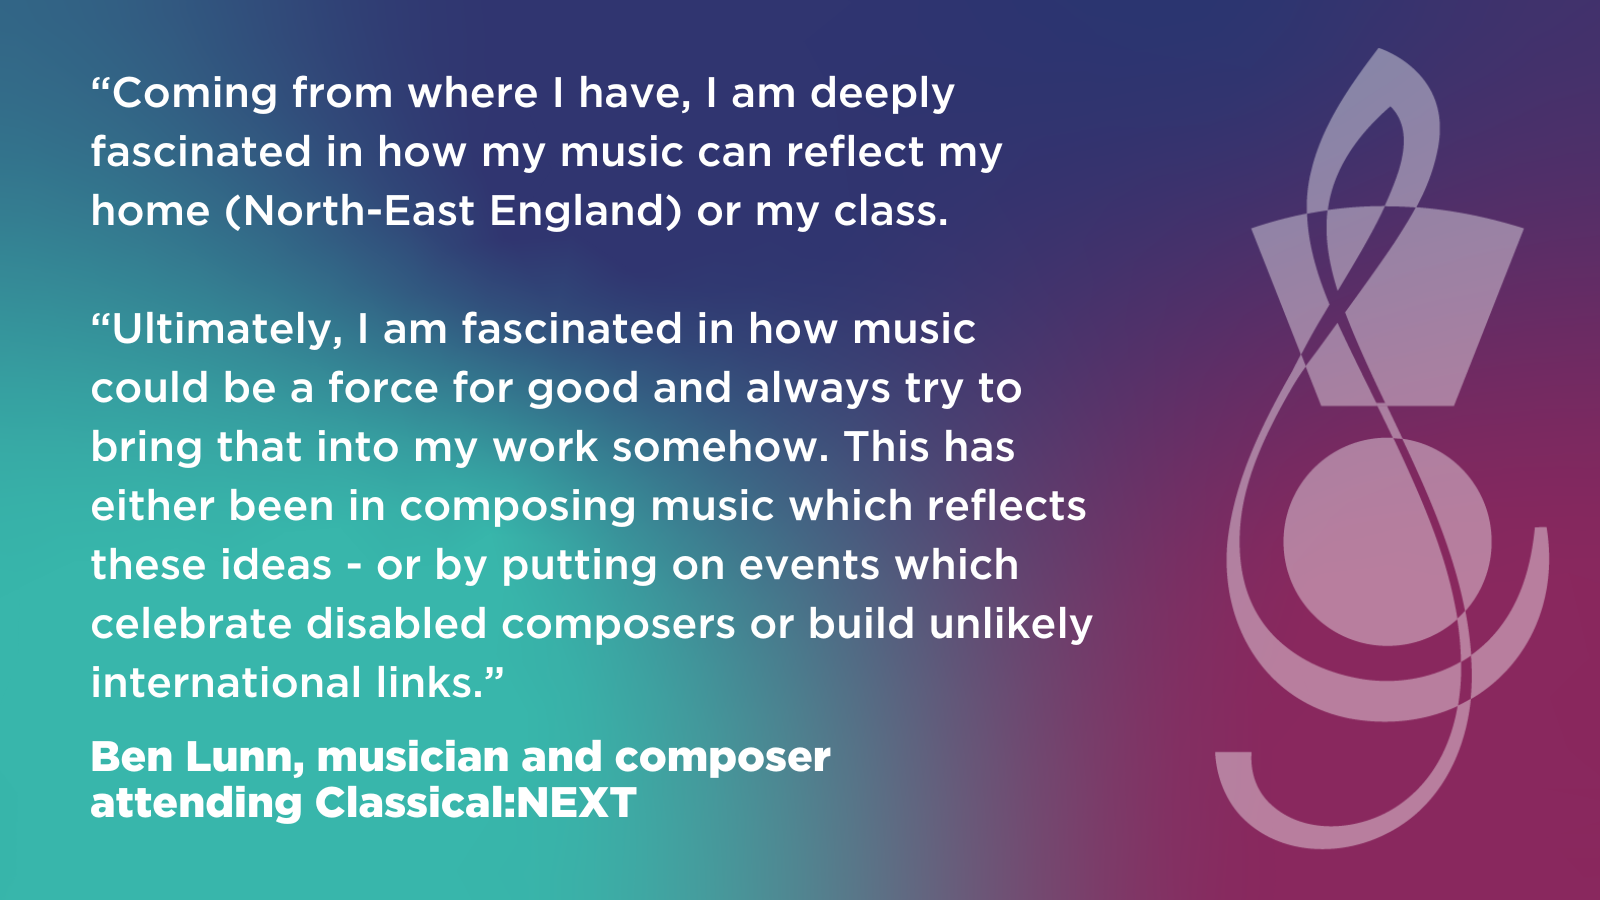 “Coming from where I have, I am deeply fascinated in how my music can reflect  my home (North-East England) or my class.  “Ultimately, I am fascinated in how music could be a force for good and always try  to bring that into my work somehow. This has either been in composing music which reflects these ideas - or by putting on events which celebrate disabled composers or build unlikely international links.”  Ben Lunn, musician and composer attending Classical:NEXT